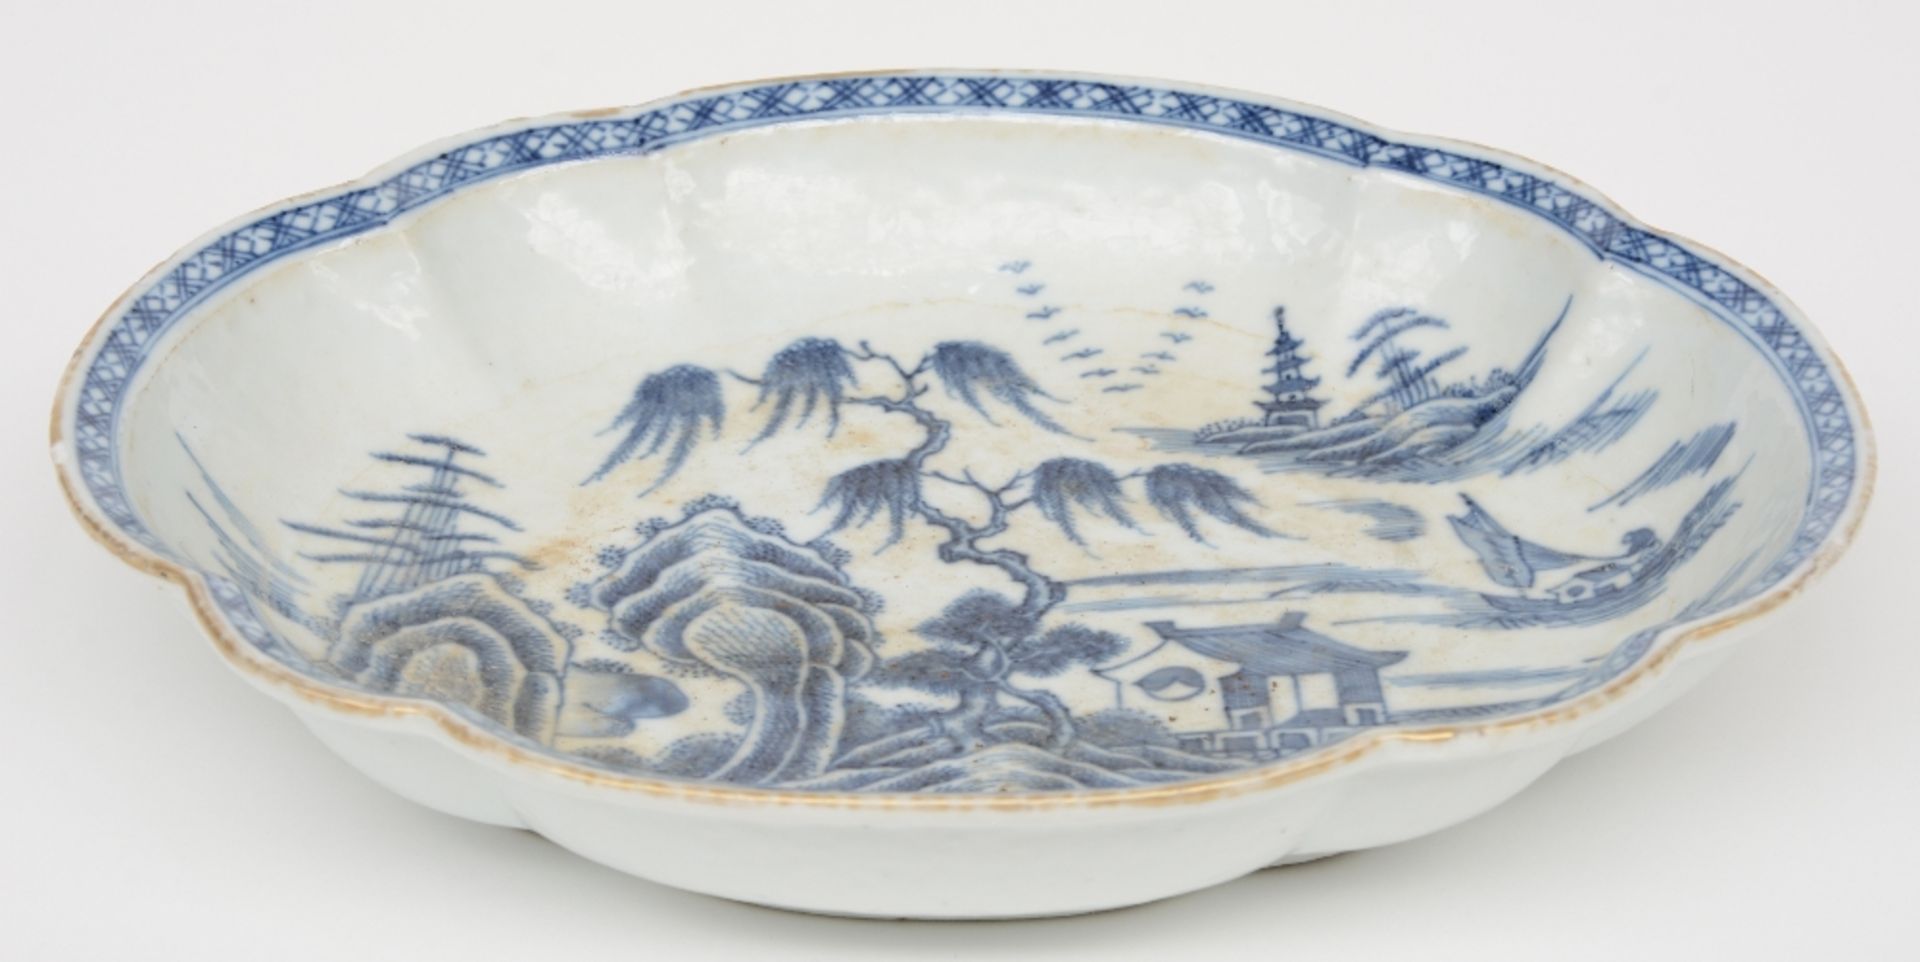 A Chinese oval dish with a profiled rim, blue and white decorated with a landscape, 18thC, - Image 3 of 4